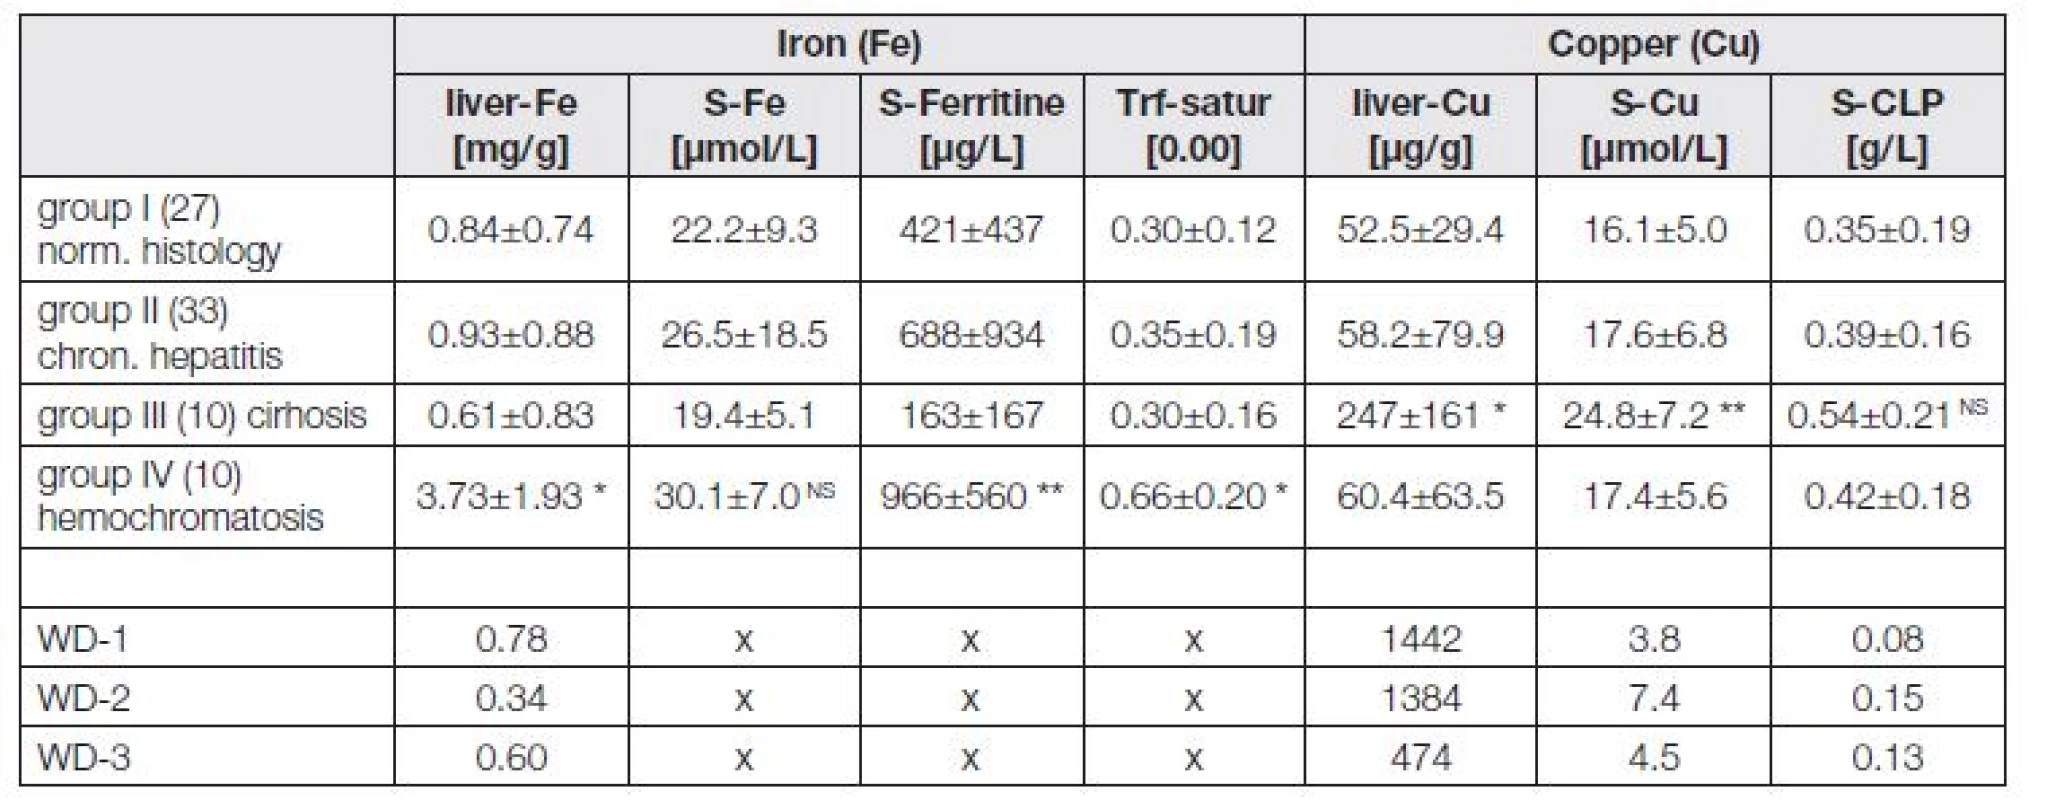 The iron and copper values recorded in the dry bioptic liver tissue plus the associated serum parameters in patients from groups I to IV and the three cases of Wilson disease